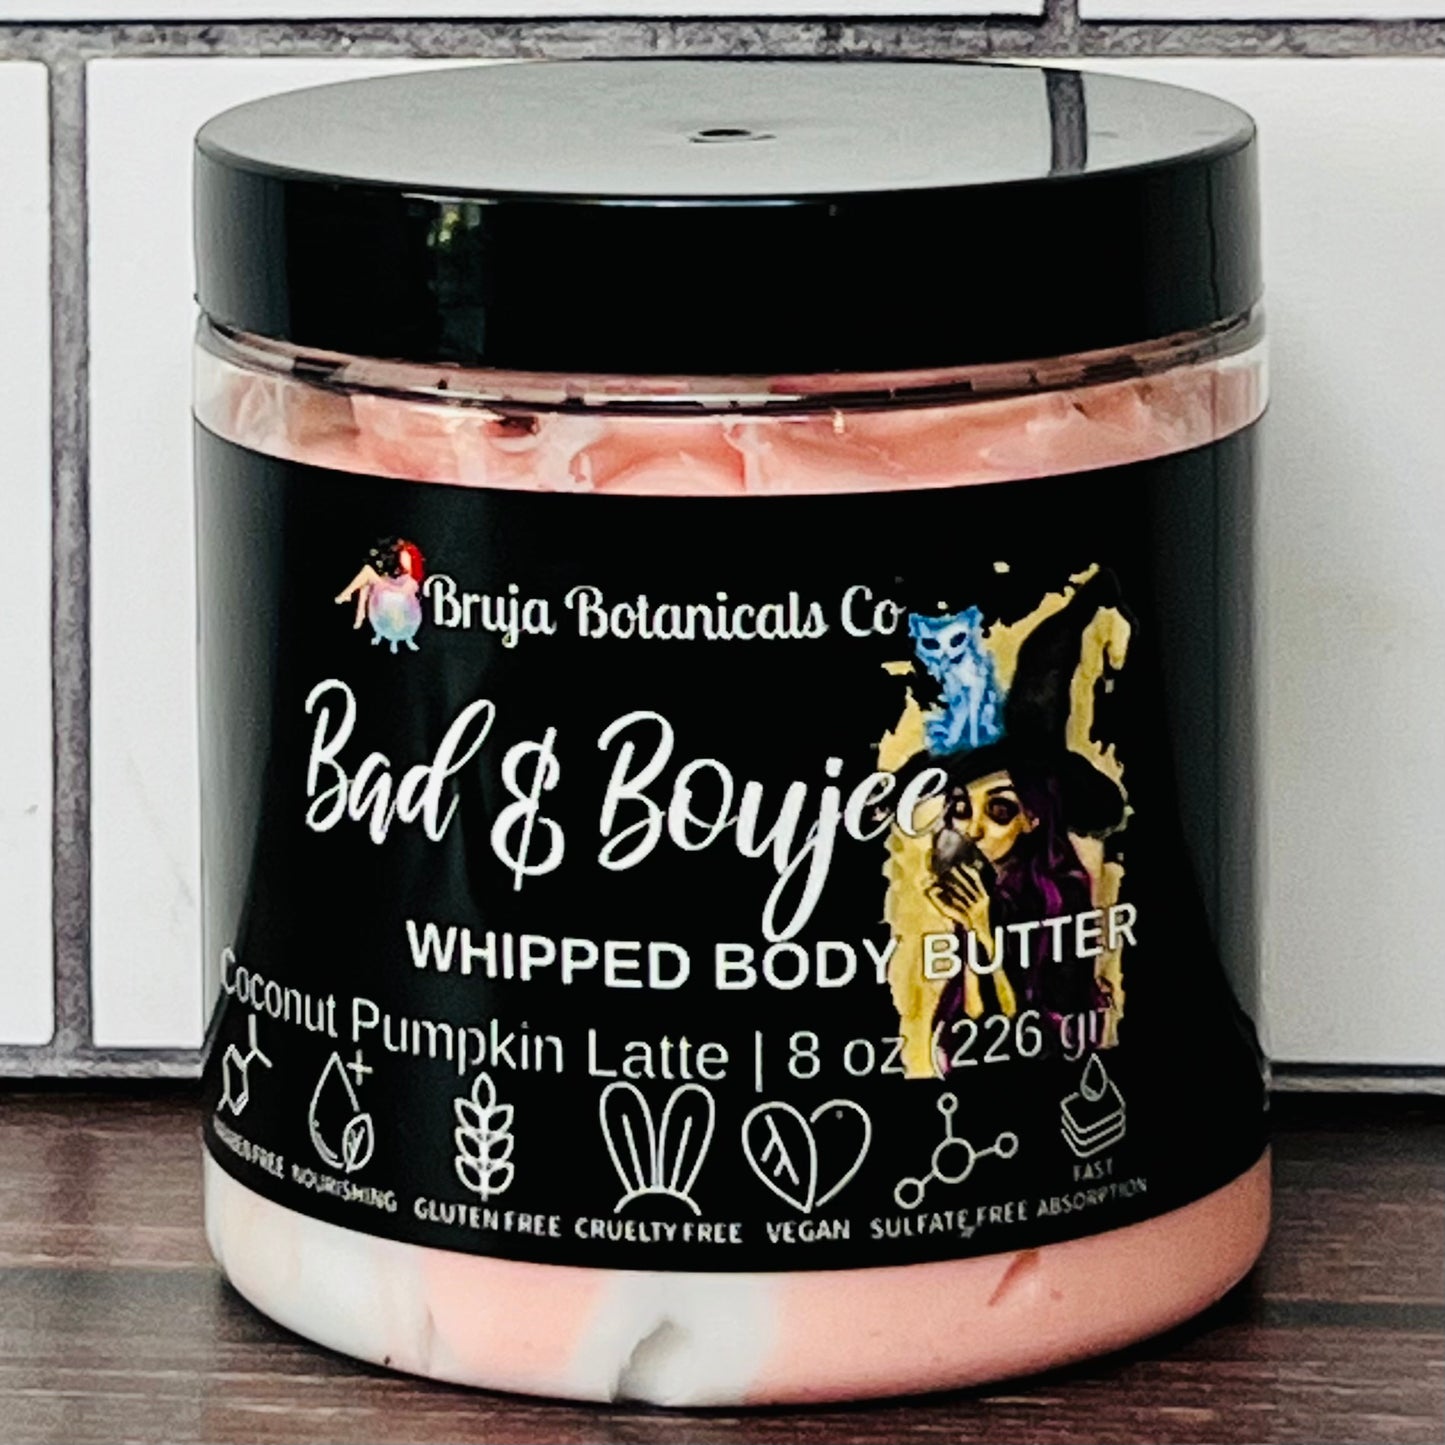 Bad & Boujee Whipped Body Butter